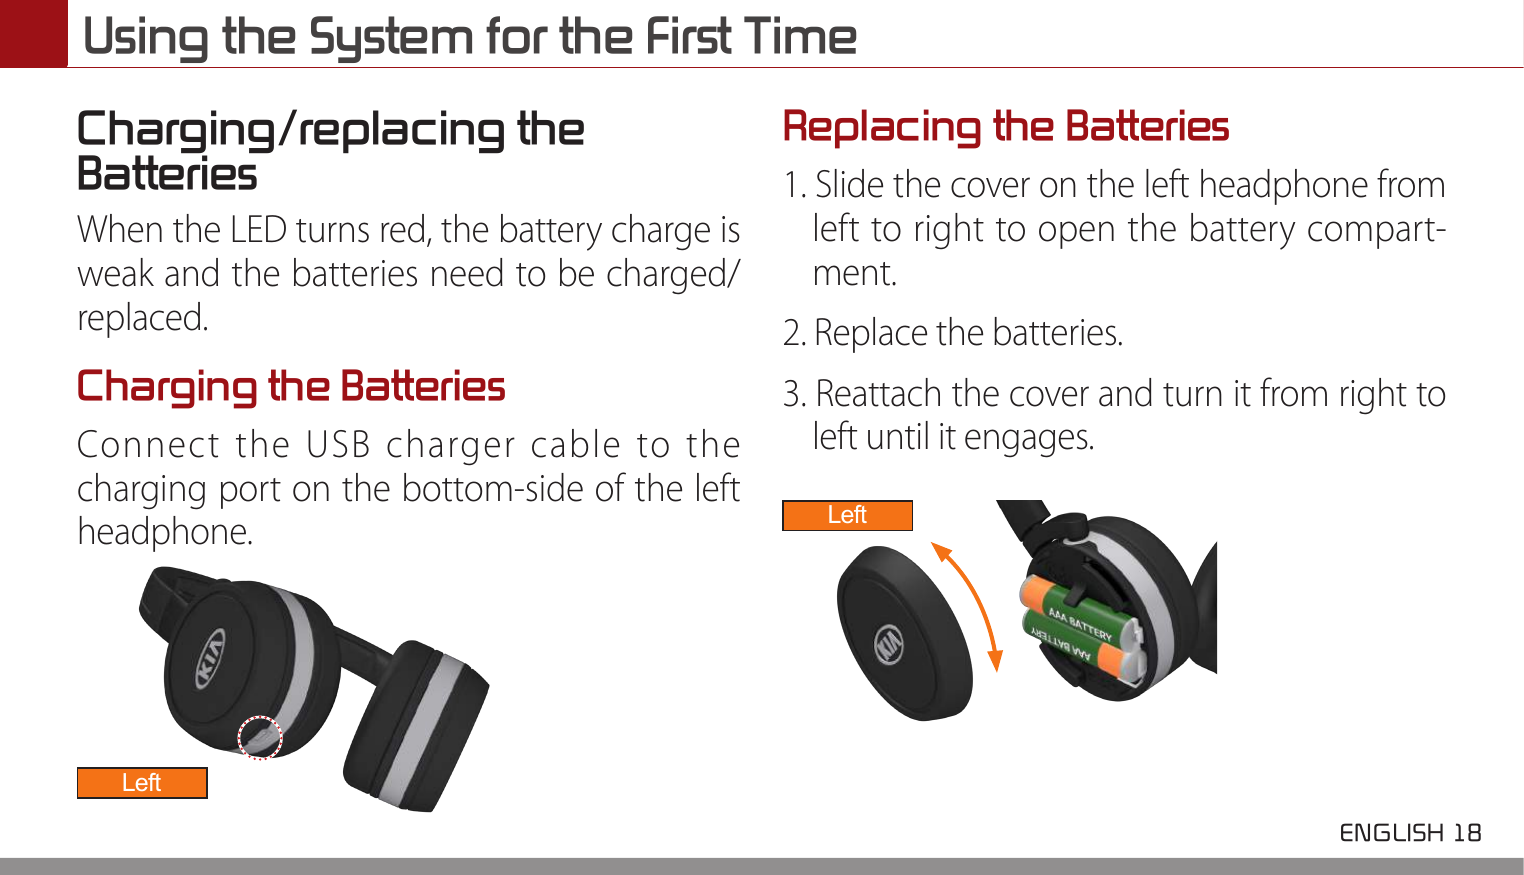 Using the System for the First Time ENGLISH 18 Charging/replacing the Batteries When the LED turns red, the battery charge is weak and the batteries need to be charged/replaced.Charging the BatteriesConnect the USB charger cable to the charging port on the bottom-side of the left headphone.LeftReplacing the Batteries1. Slide the cover on the left headphone from left to right to open the battery compart-ment.2. Replace the batteries.3. Reattach the cover and turn it from right to left until it engages.Left